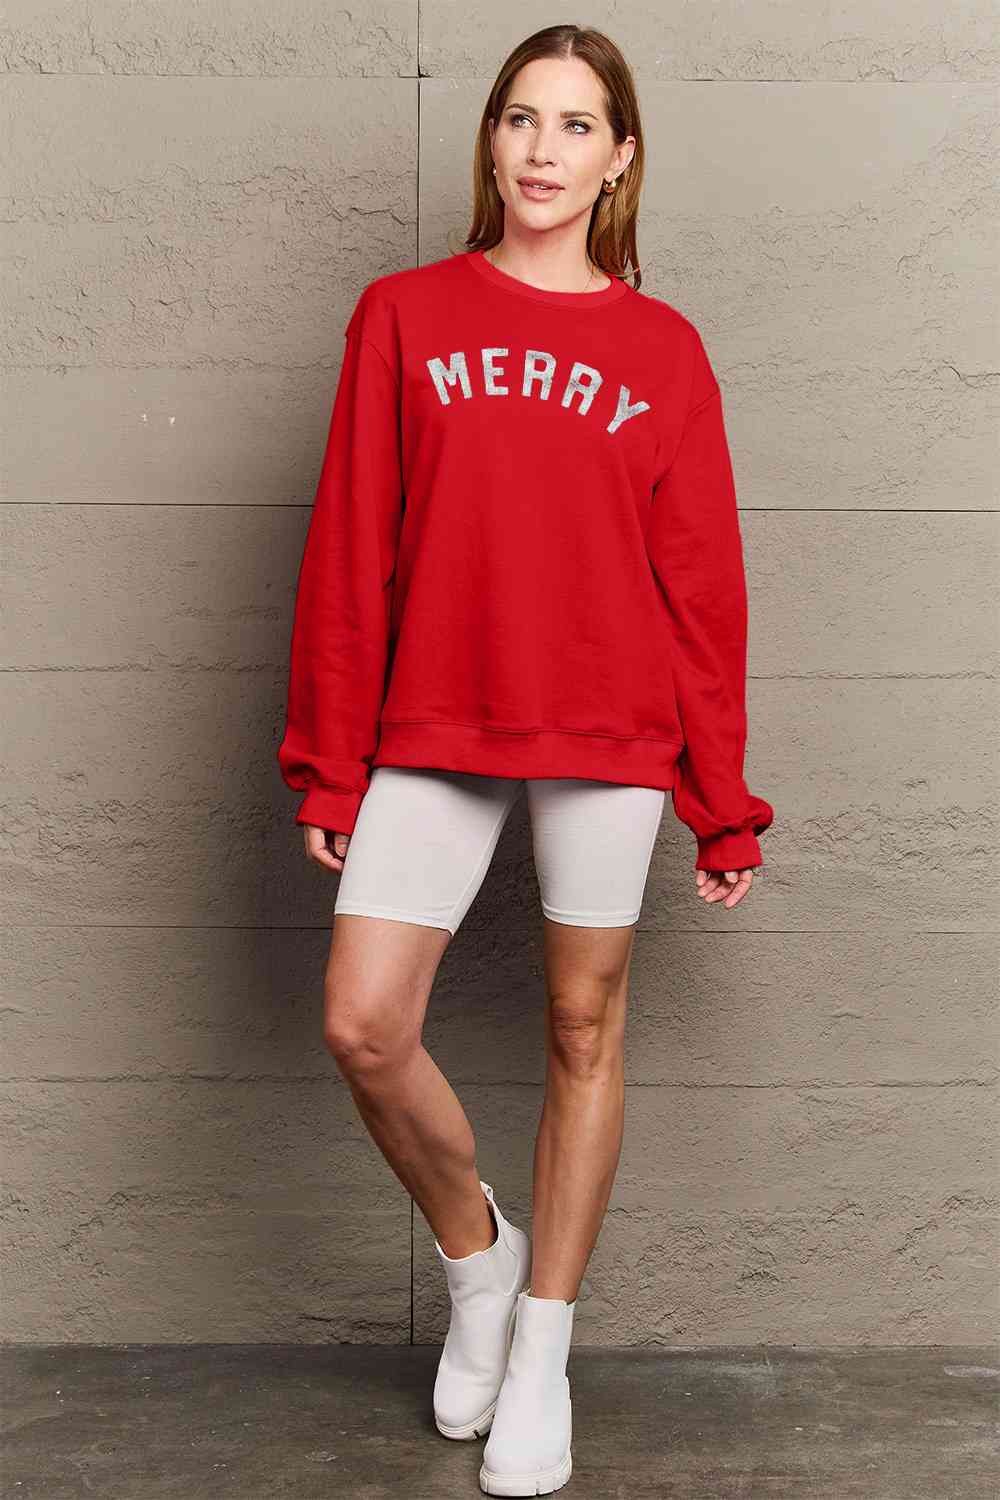 Simply Love Full Size MERRY Graphic Sweatshirt BLUE ZONE PLANET